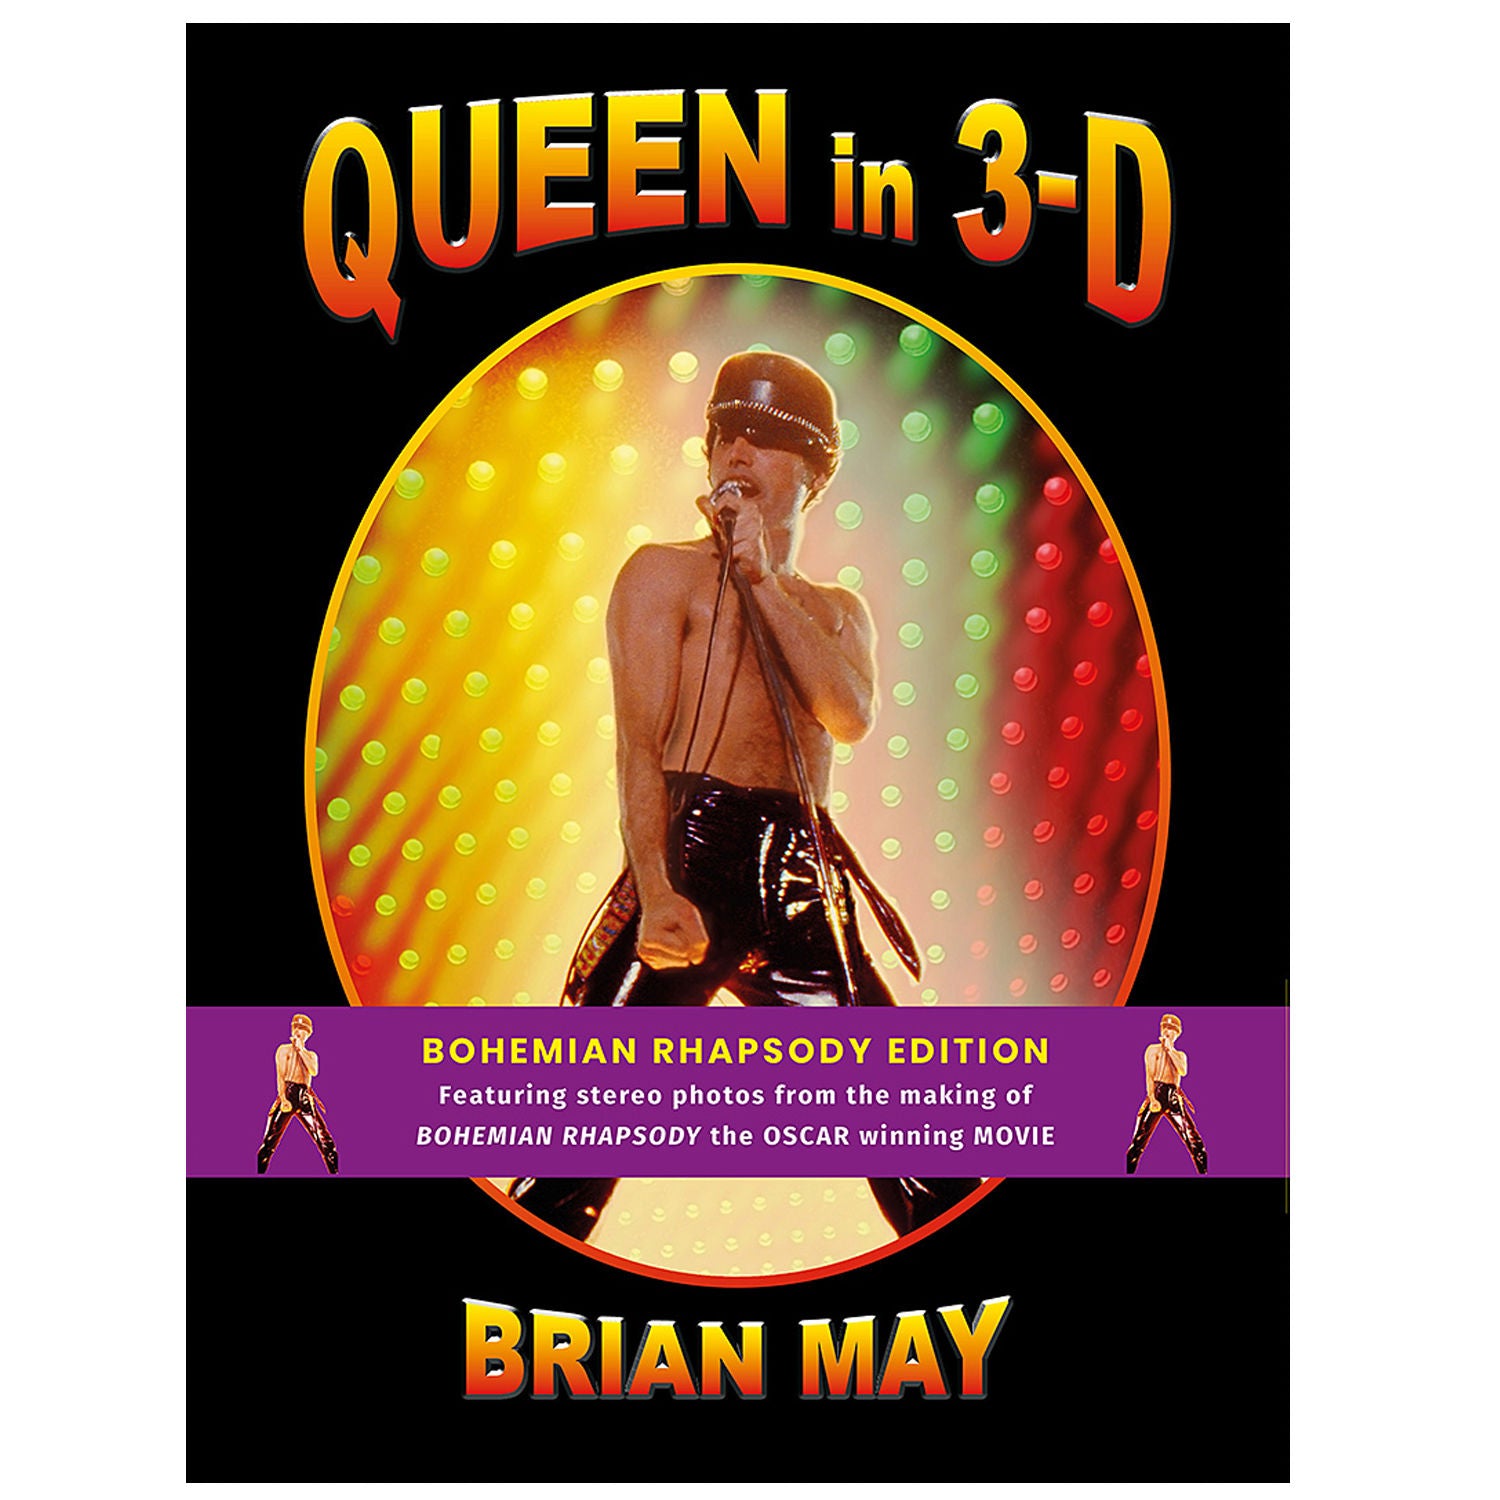 Brian May - Queen In 3-D, The Bohemian Rhapsody Deluxe Edition